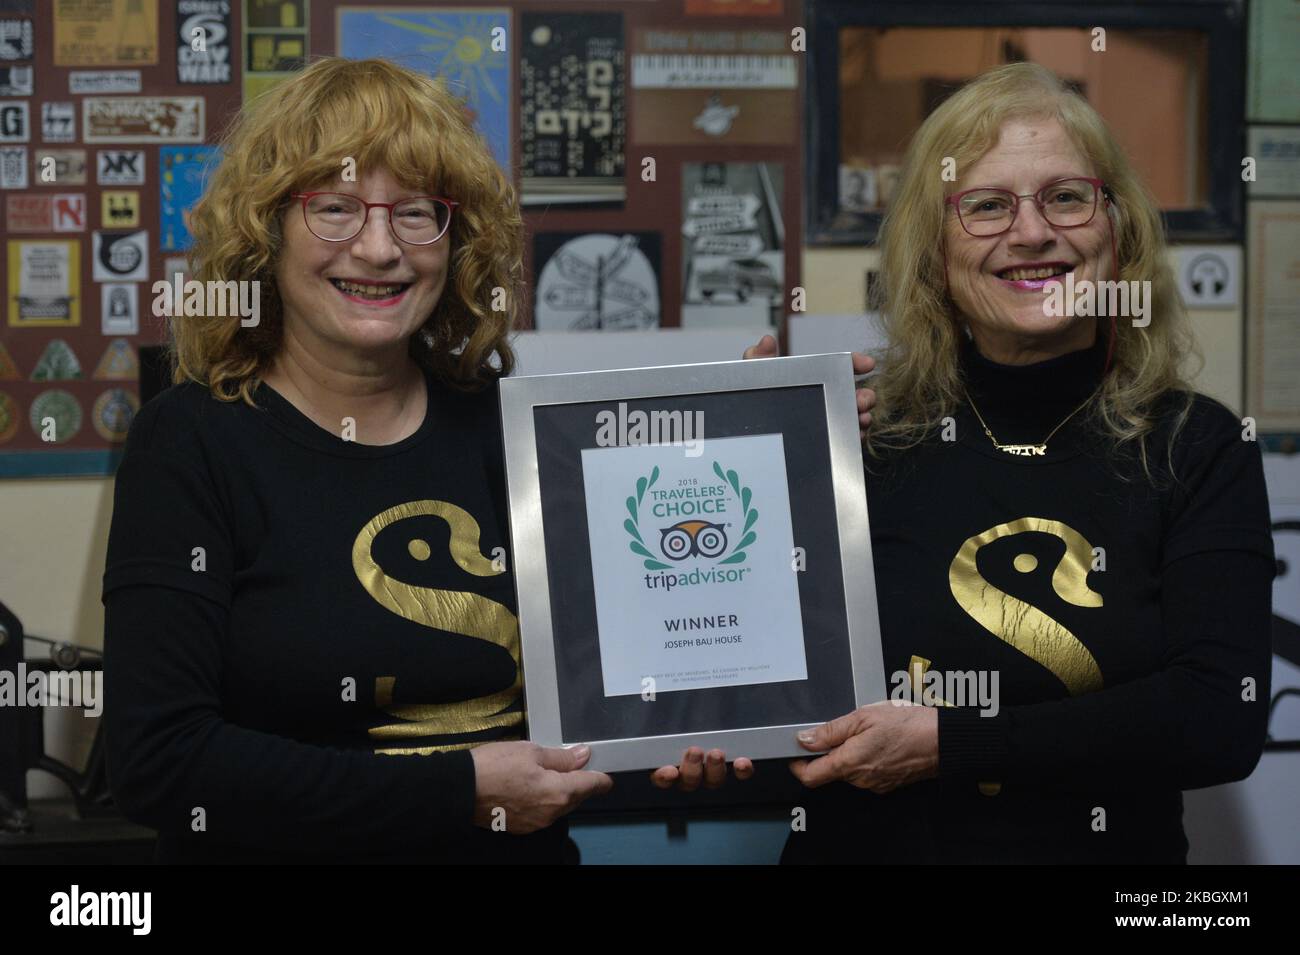 Hadasa Bau (R) and Clila Bau-Cohen (L) with the Trip Advisor 2018 Winner Award for the best museum, inside 'Joseph Bau house' Museum in Tel Aviv. Joseph Bau was a Polish-Israeli artist, philosopher, inventor, animator, comedian, commercial creator, copy-writer, photographer and poet. He trained as a graphic artist at the Jan Matejko Academy of Fine Arts in Krakow. During WW2 he was transferred to the Plaszow concentration camp, where he met and secretly married Rebecca Tennenbaum. Their story inspired Steven Spielberg and their wedding is shown in Spielberg movie 'Schindler's List'. Later, Jos Stock Photo